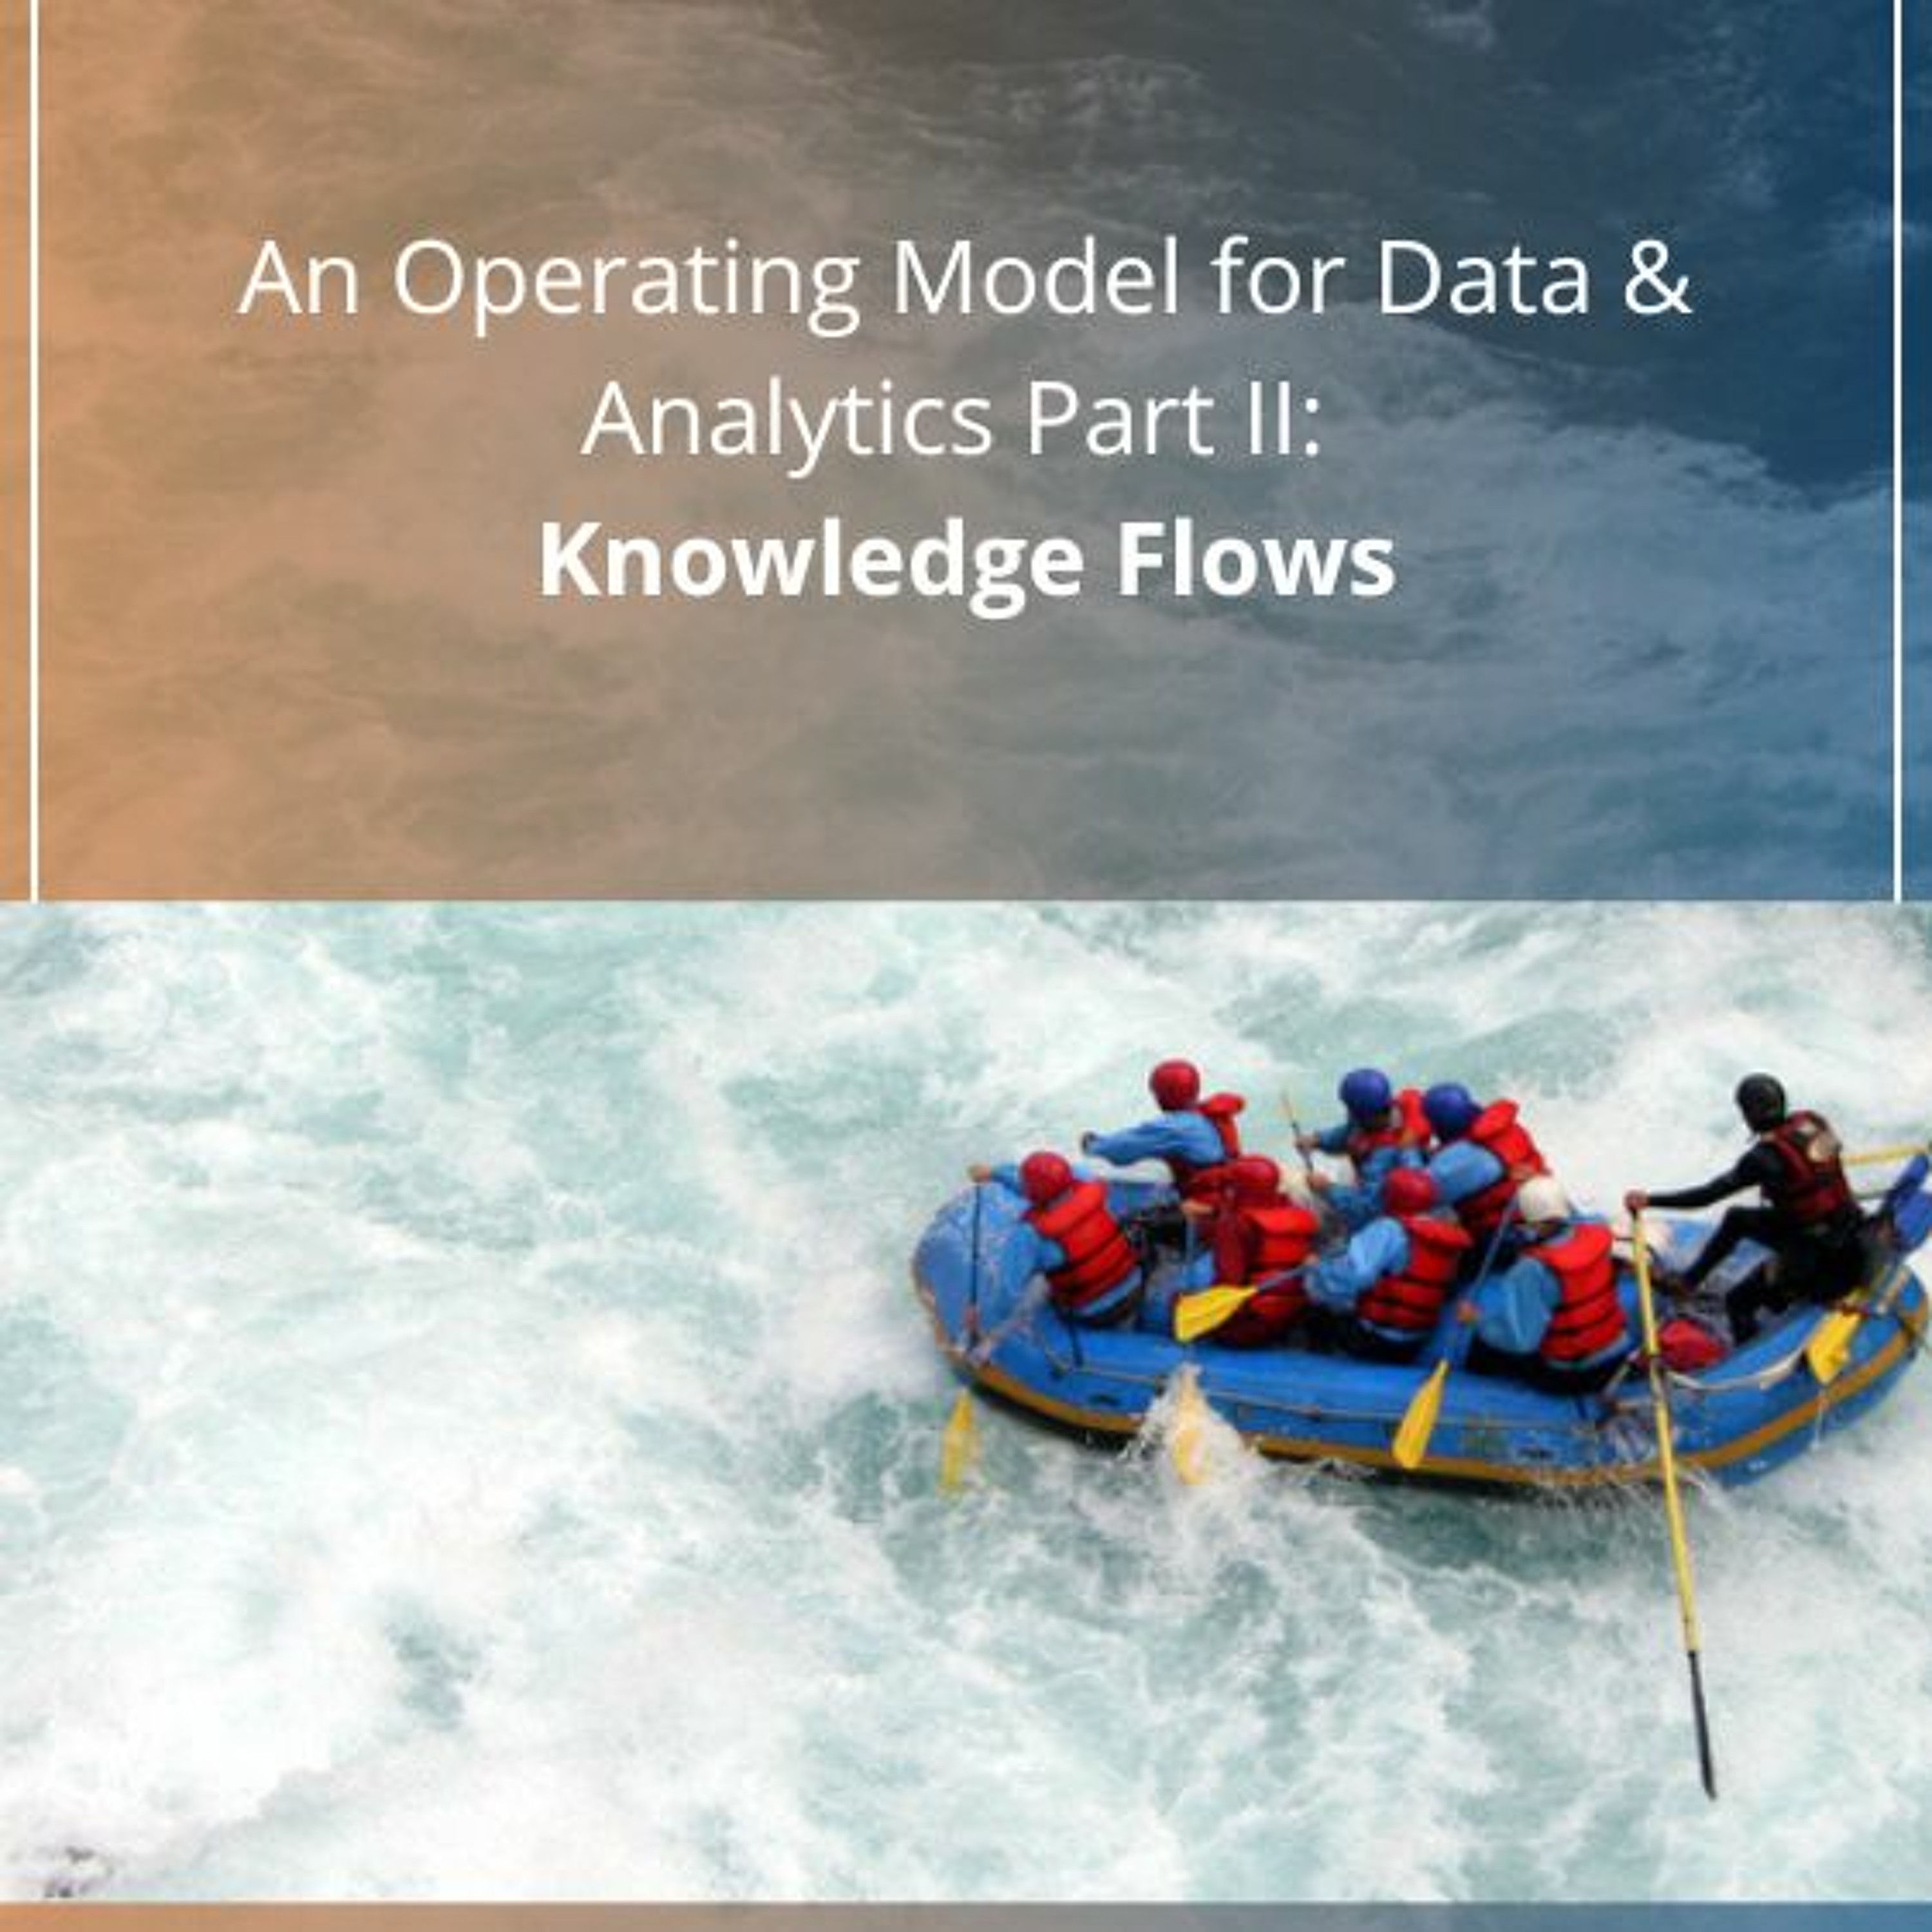 An Operating Model For Data & Analytics Part II: Knowledge Flows - Audio Blog